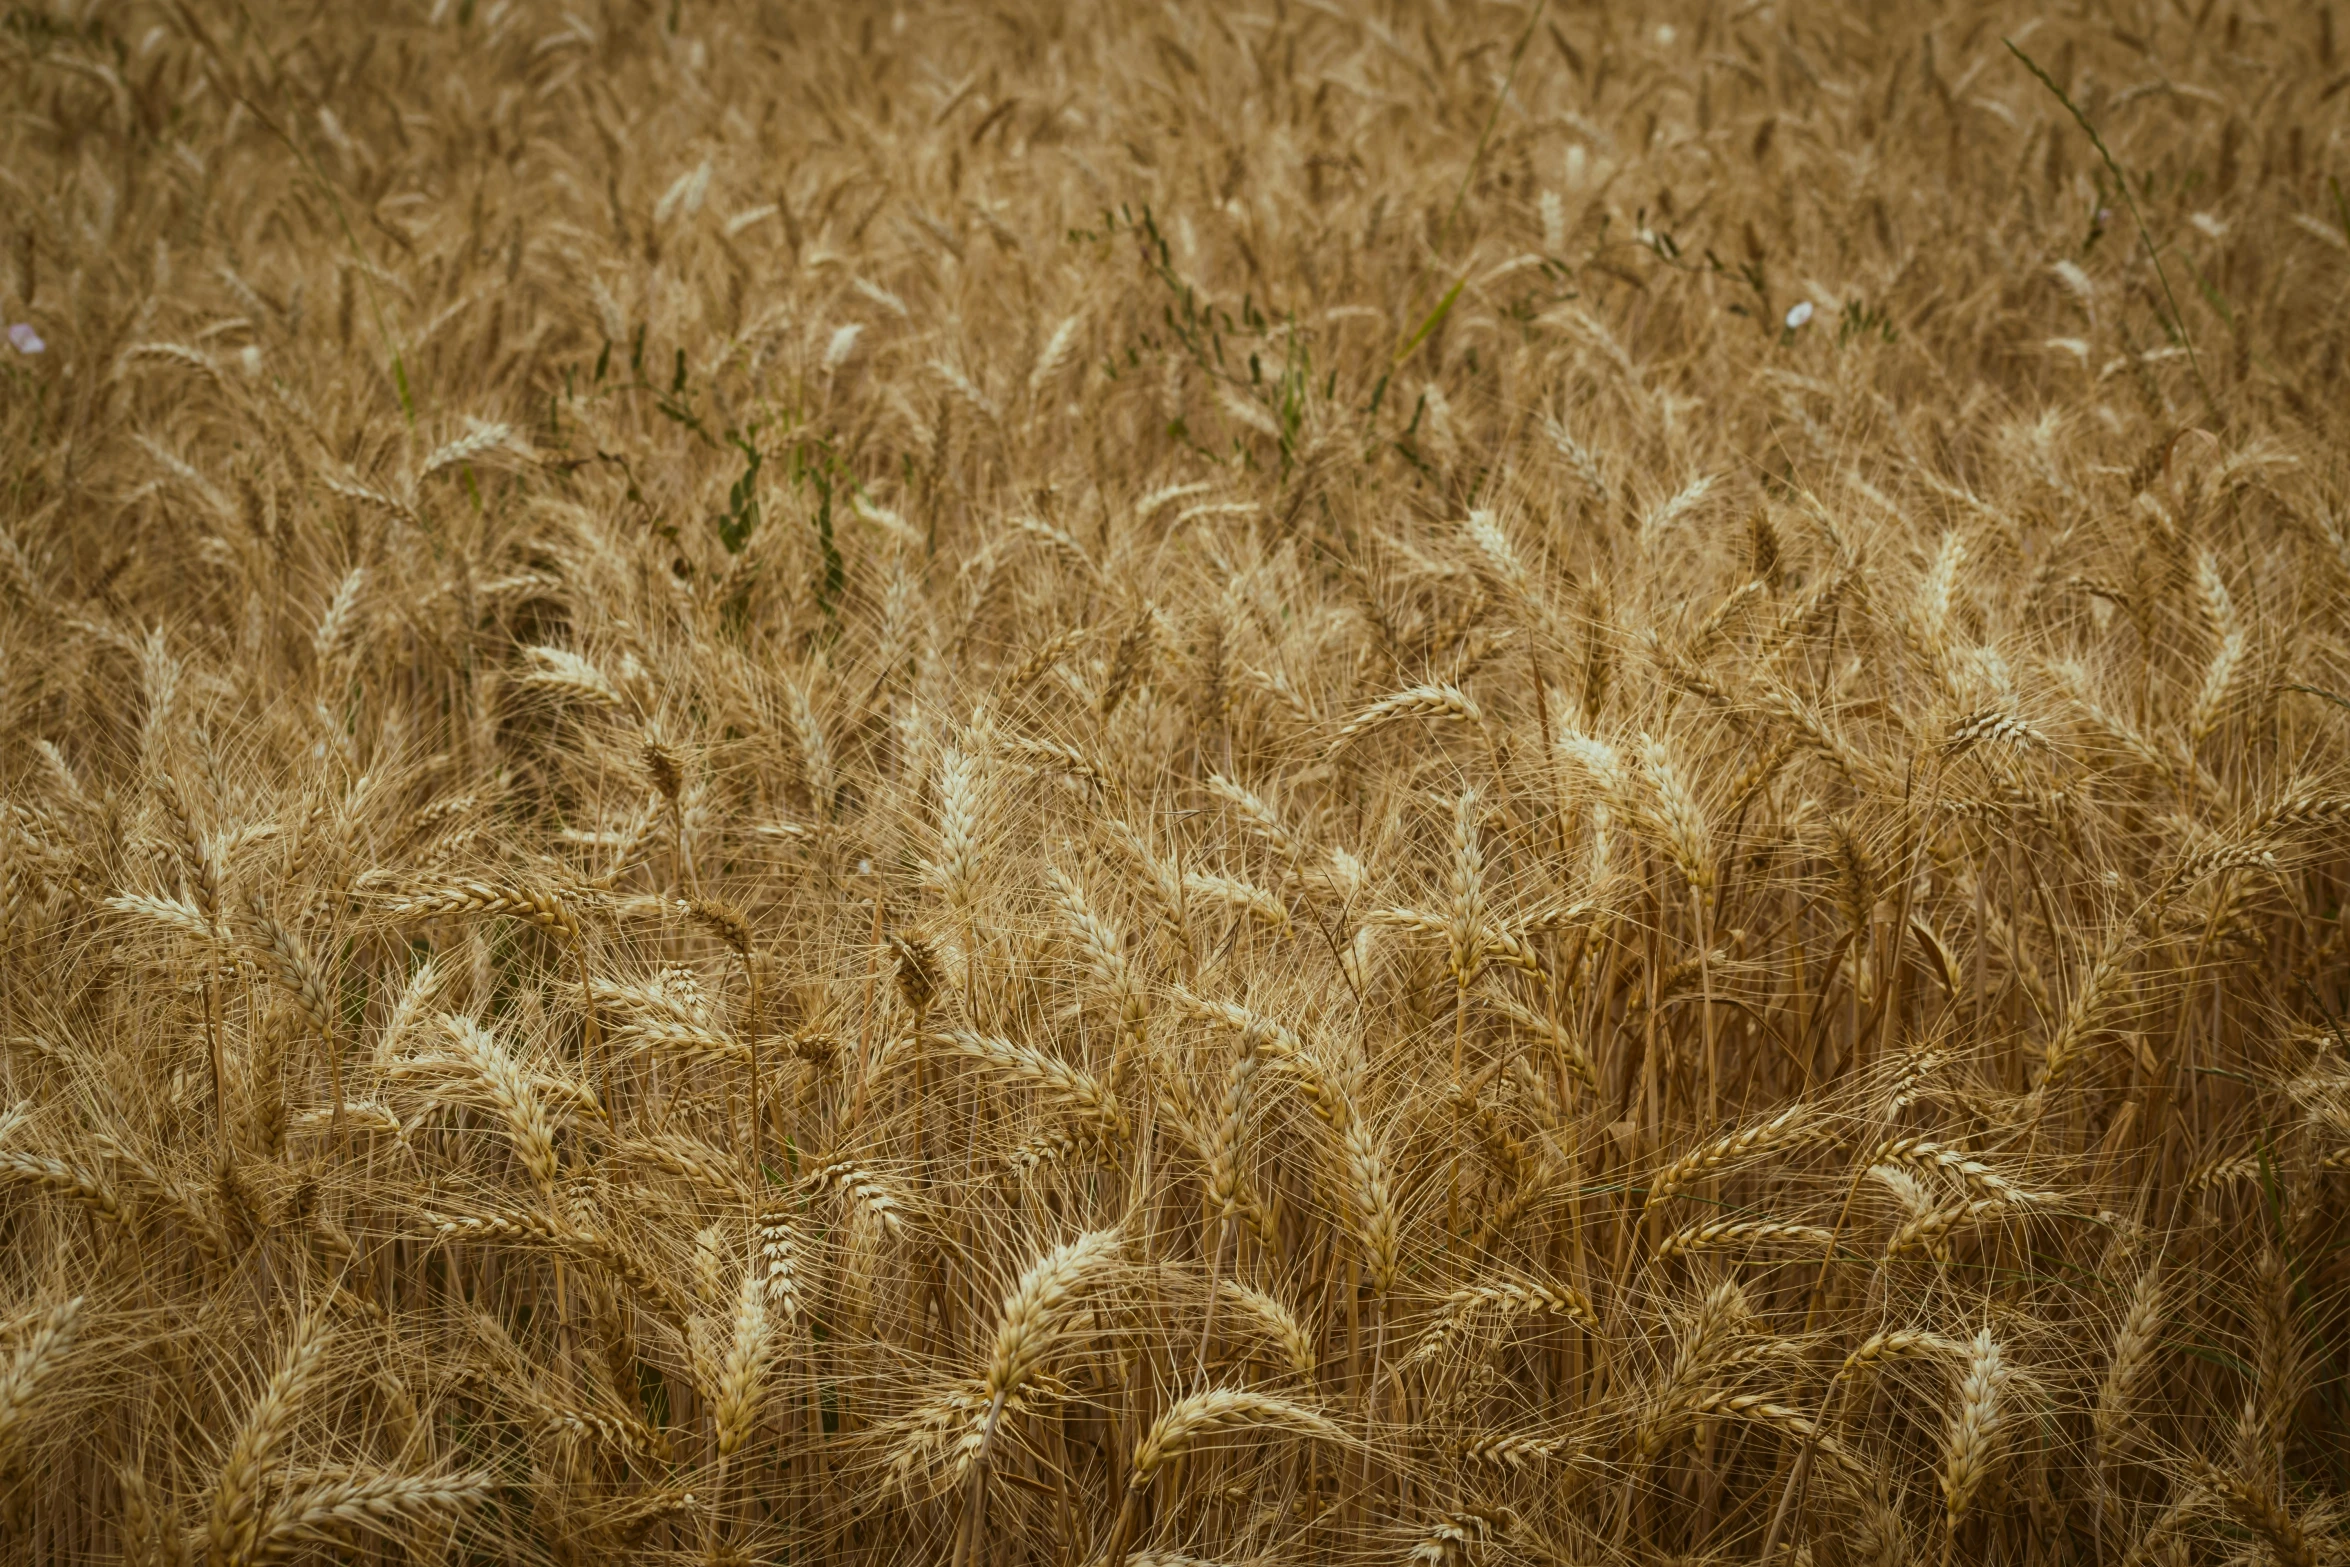 an image of a field with grain in it